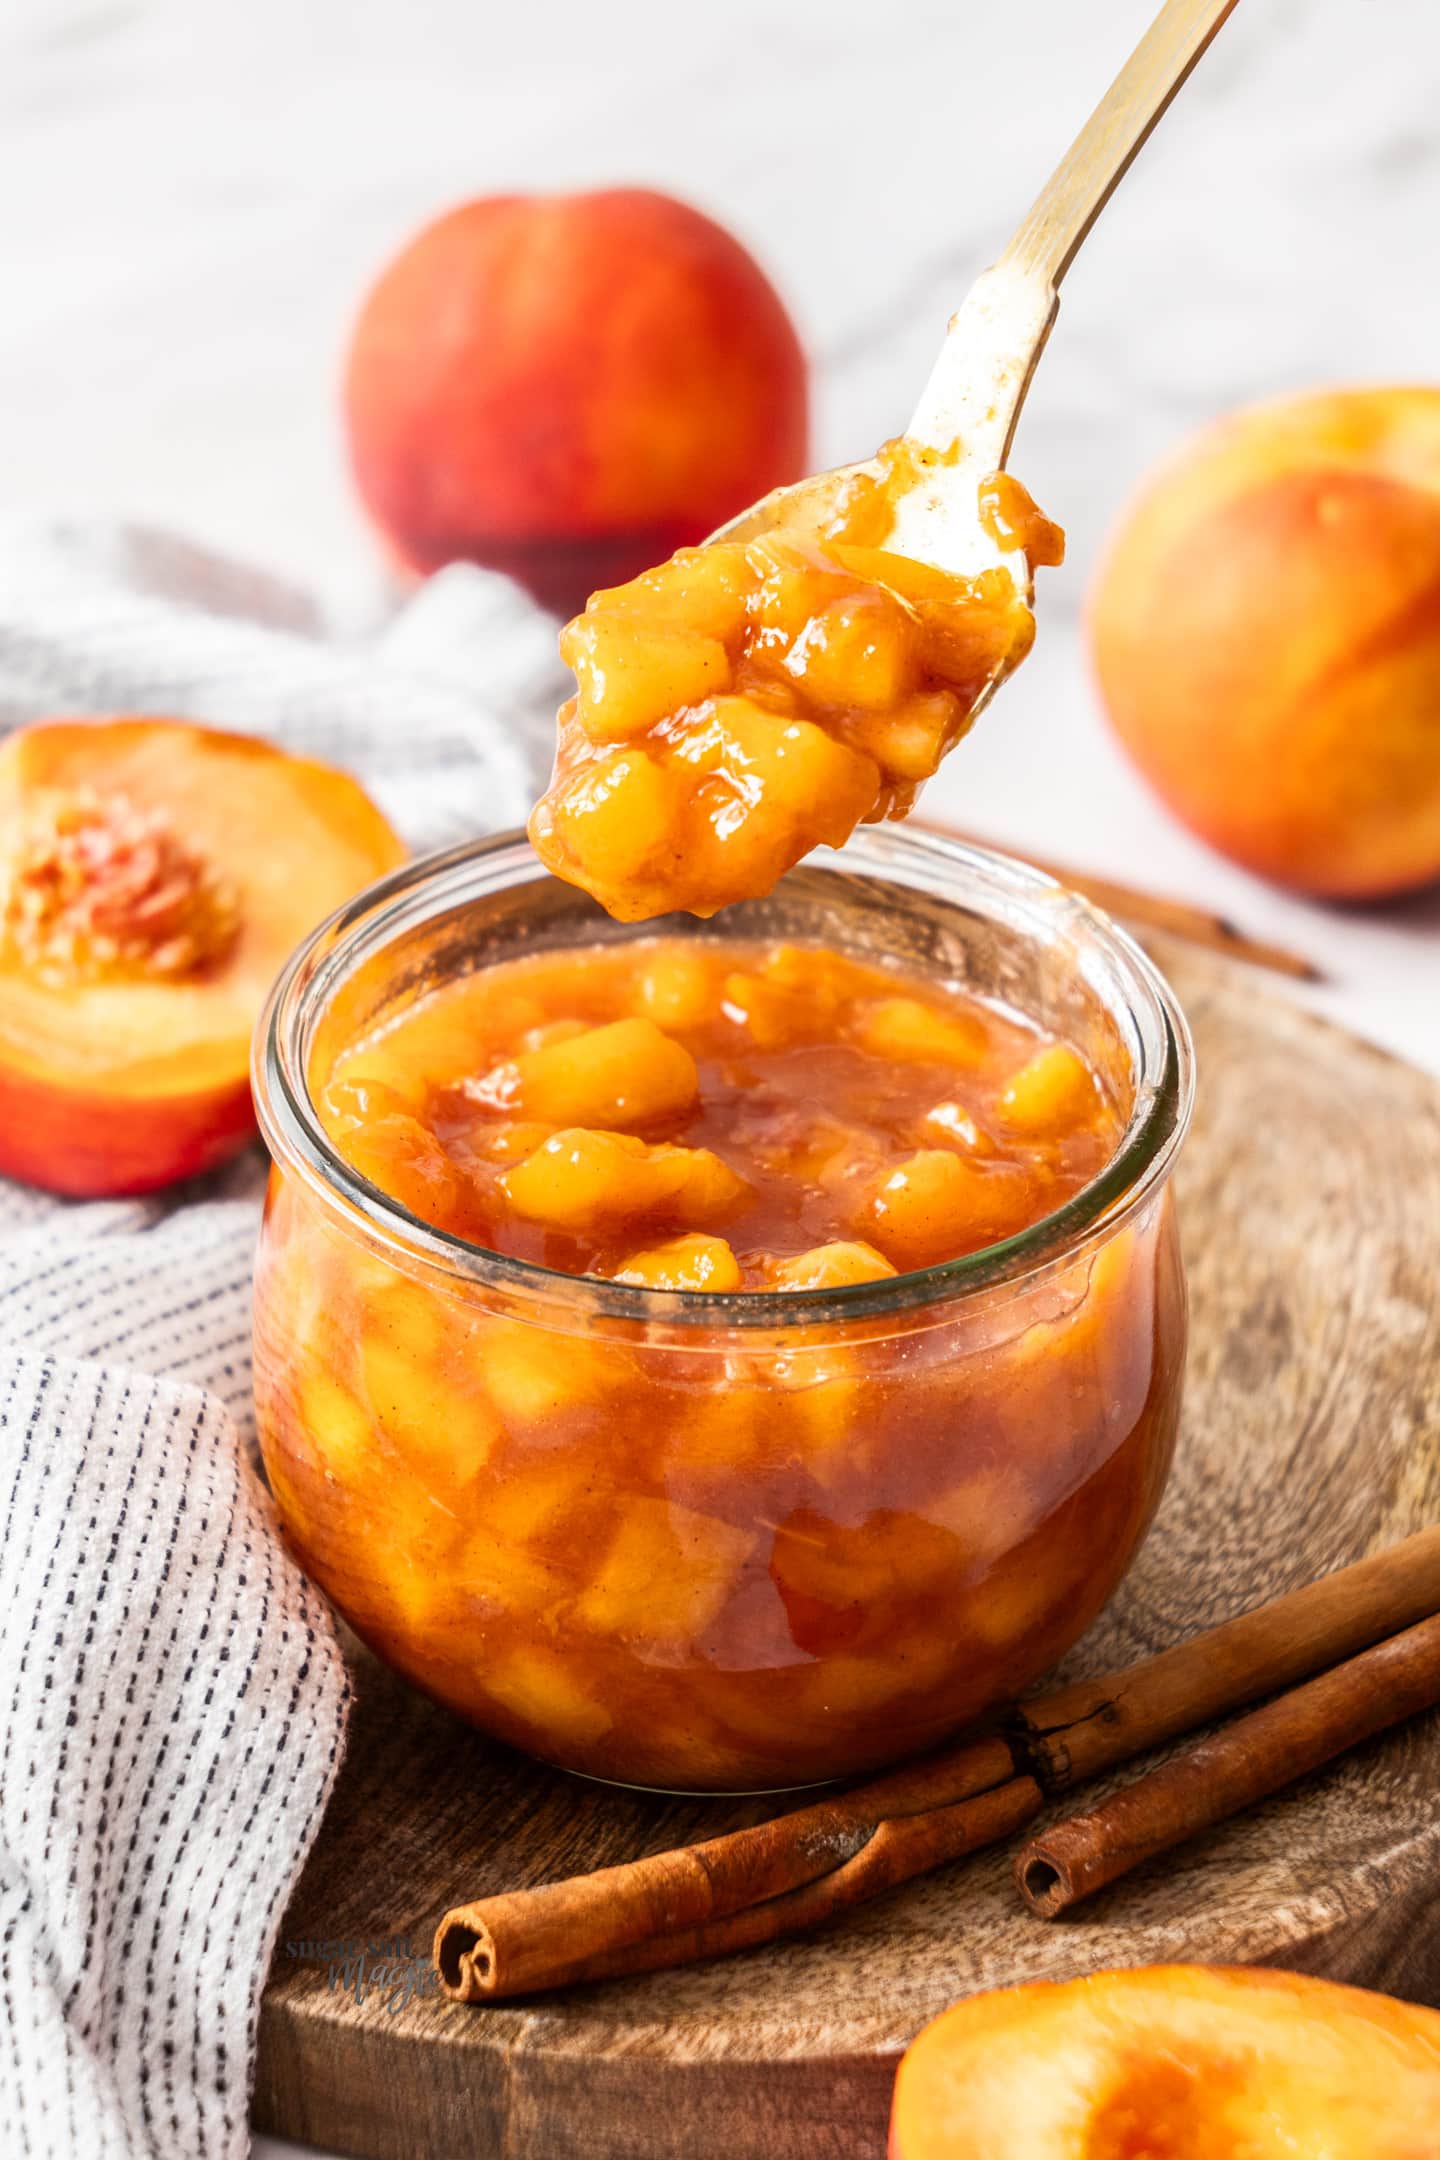 A spoon taking peach compote from a jar.